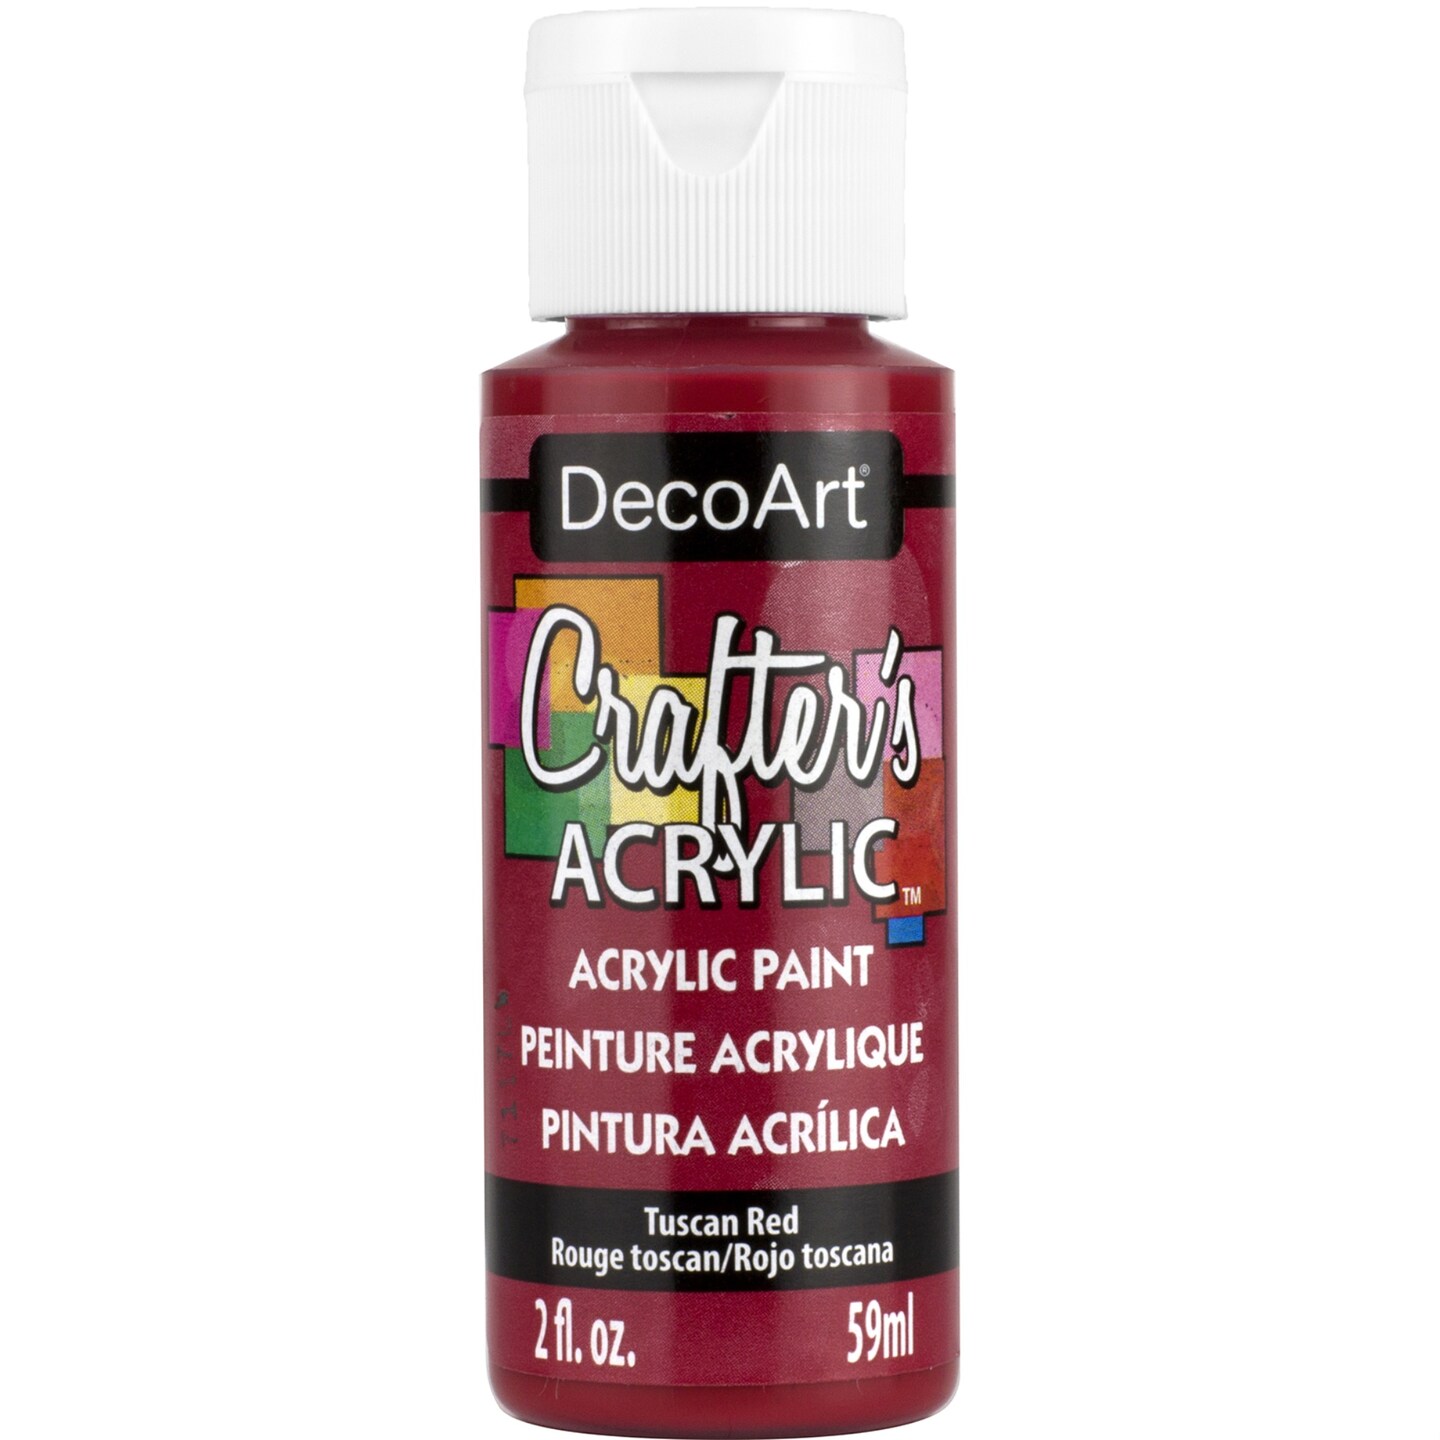 DecoArt Crafter's Acrylic Paint, 2-Ounce, Christmas Red